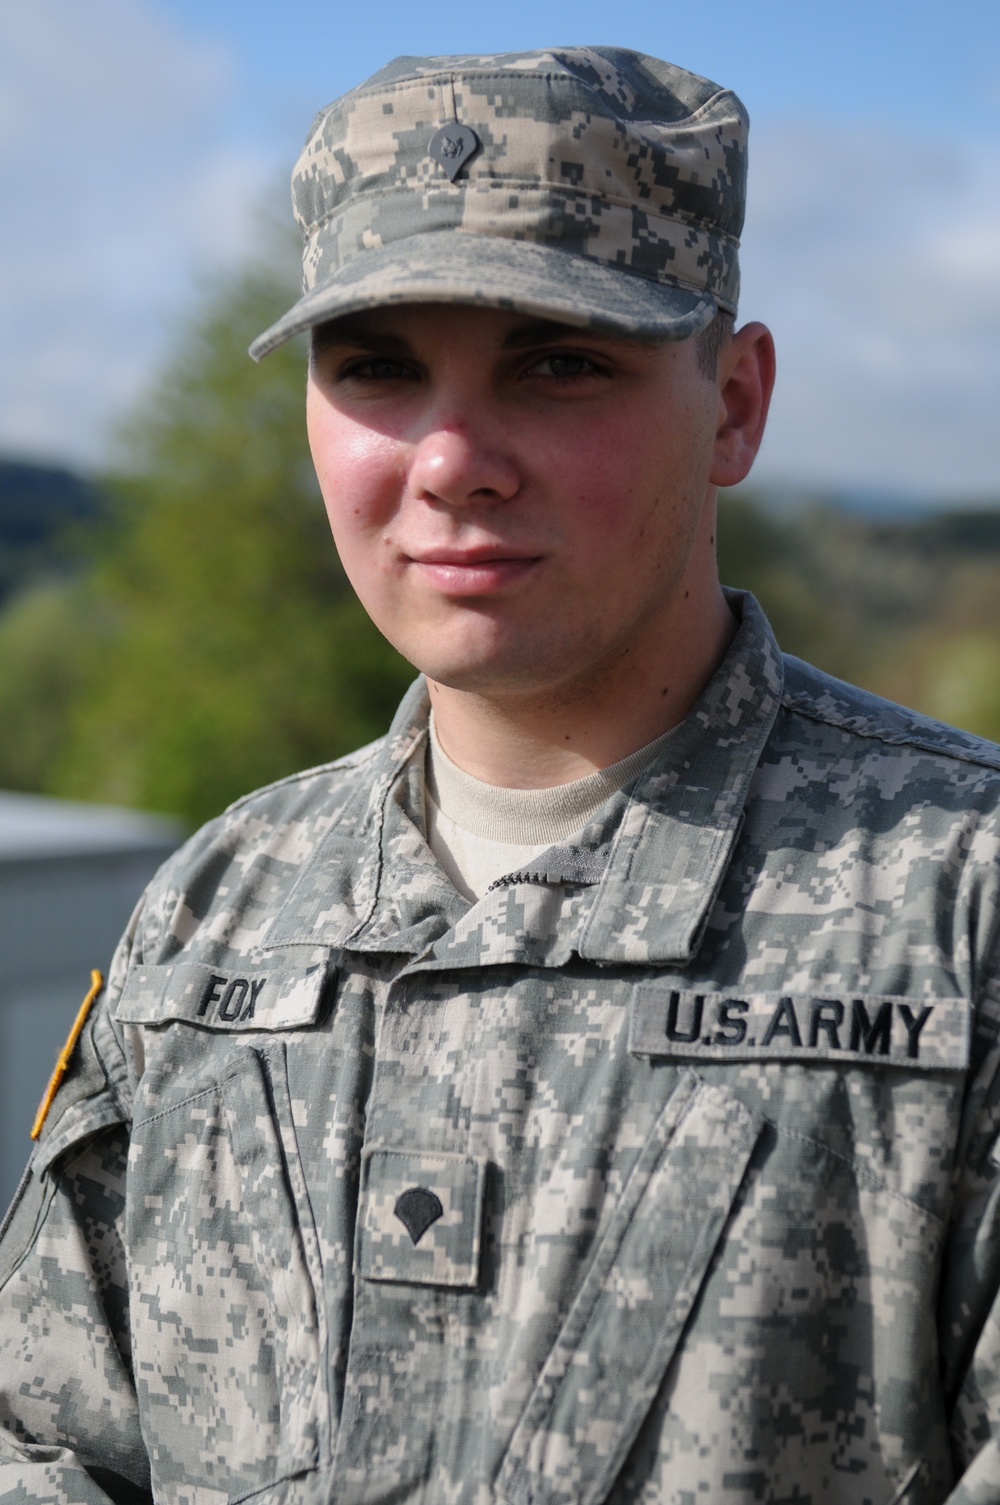 170th IBCT soldier named Engineer Soldier of the Year